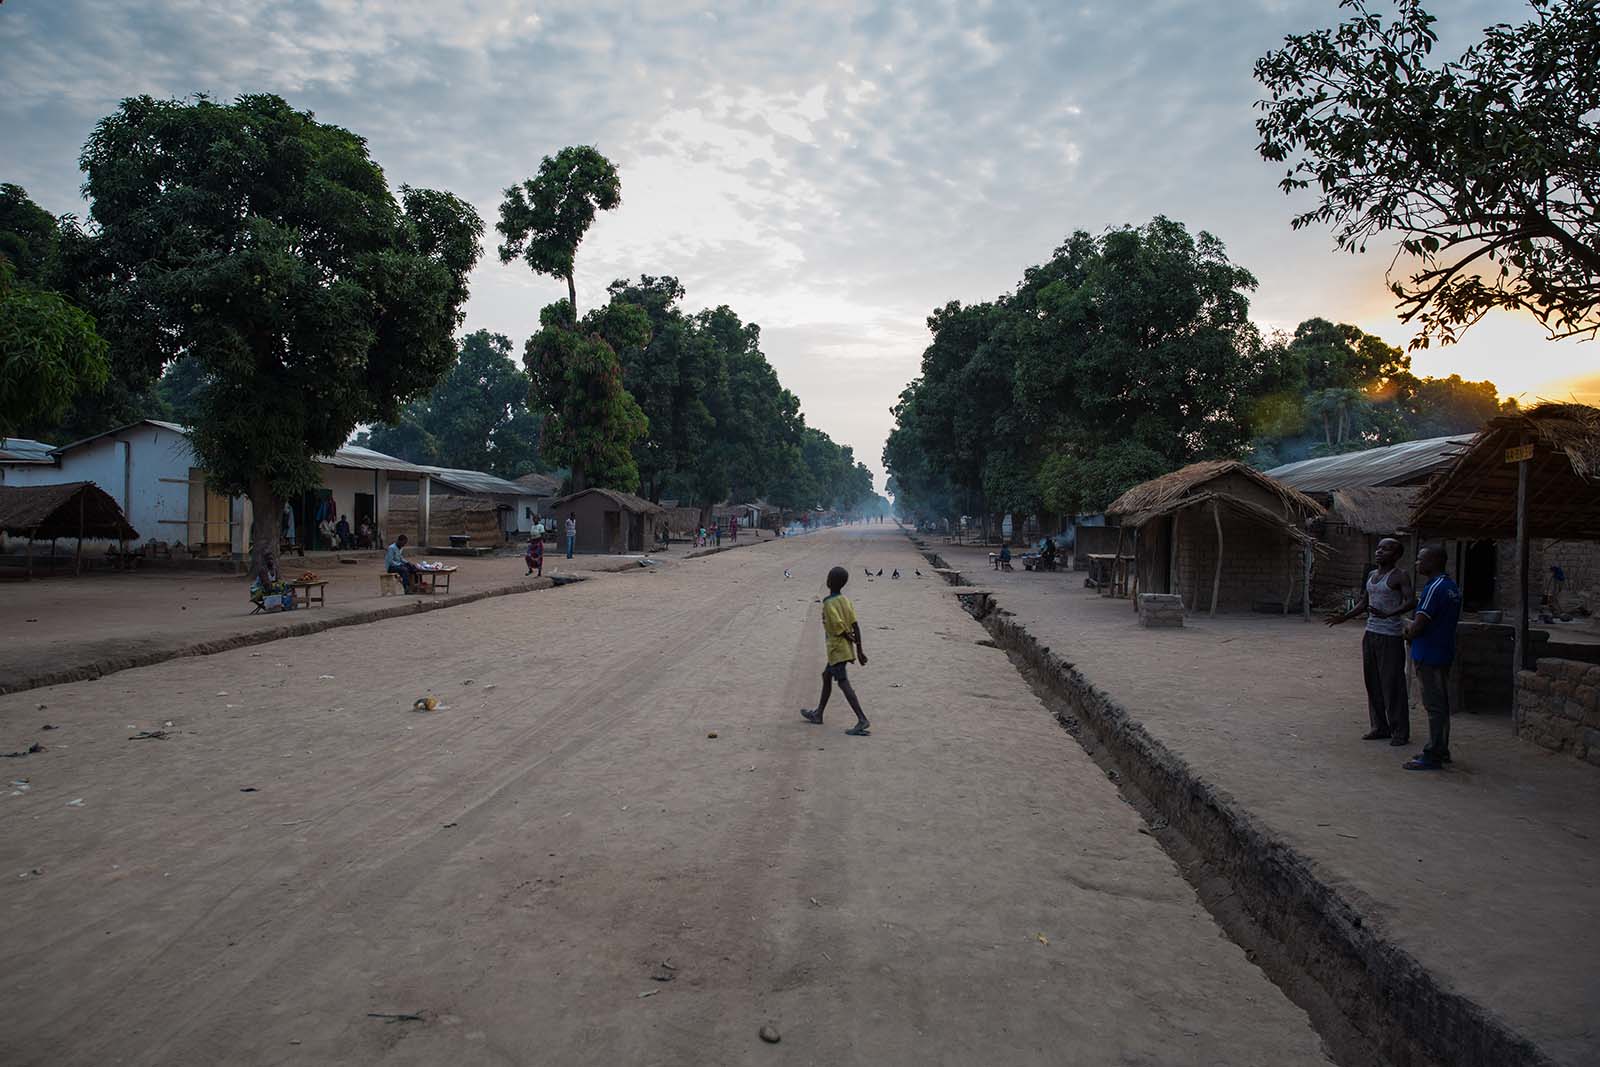 A streetscape in Central African Republic